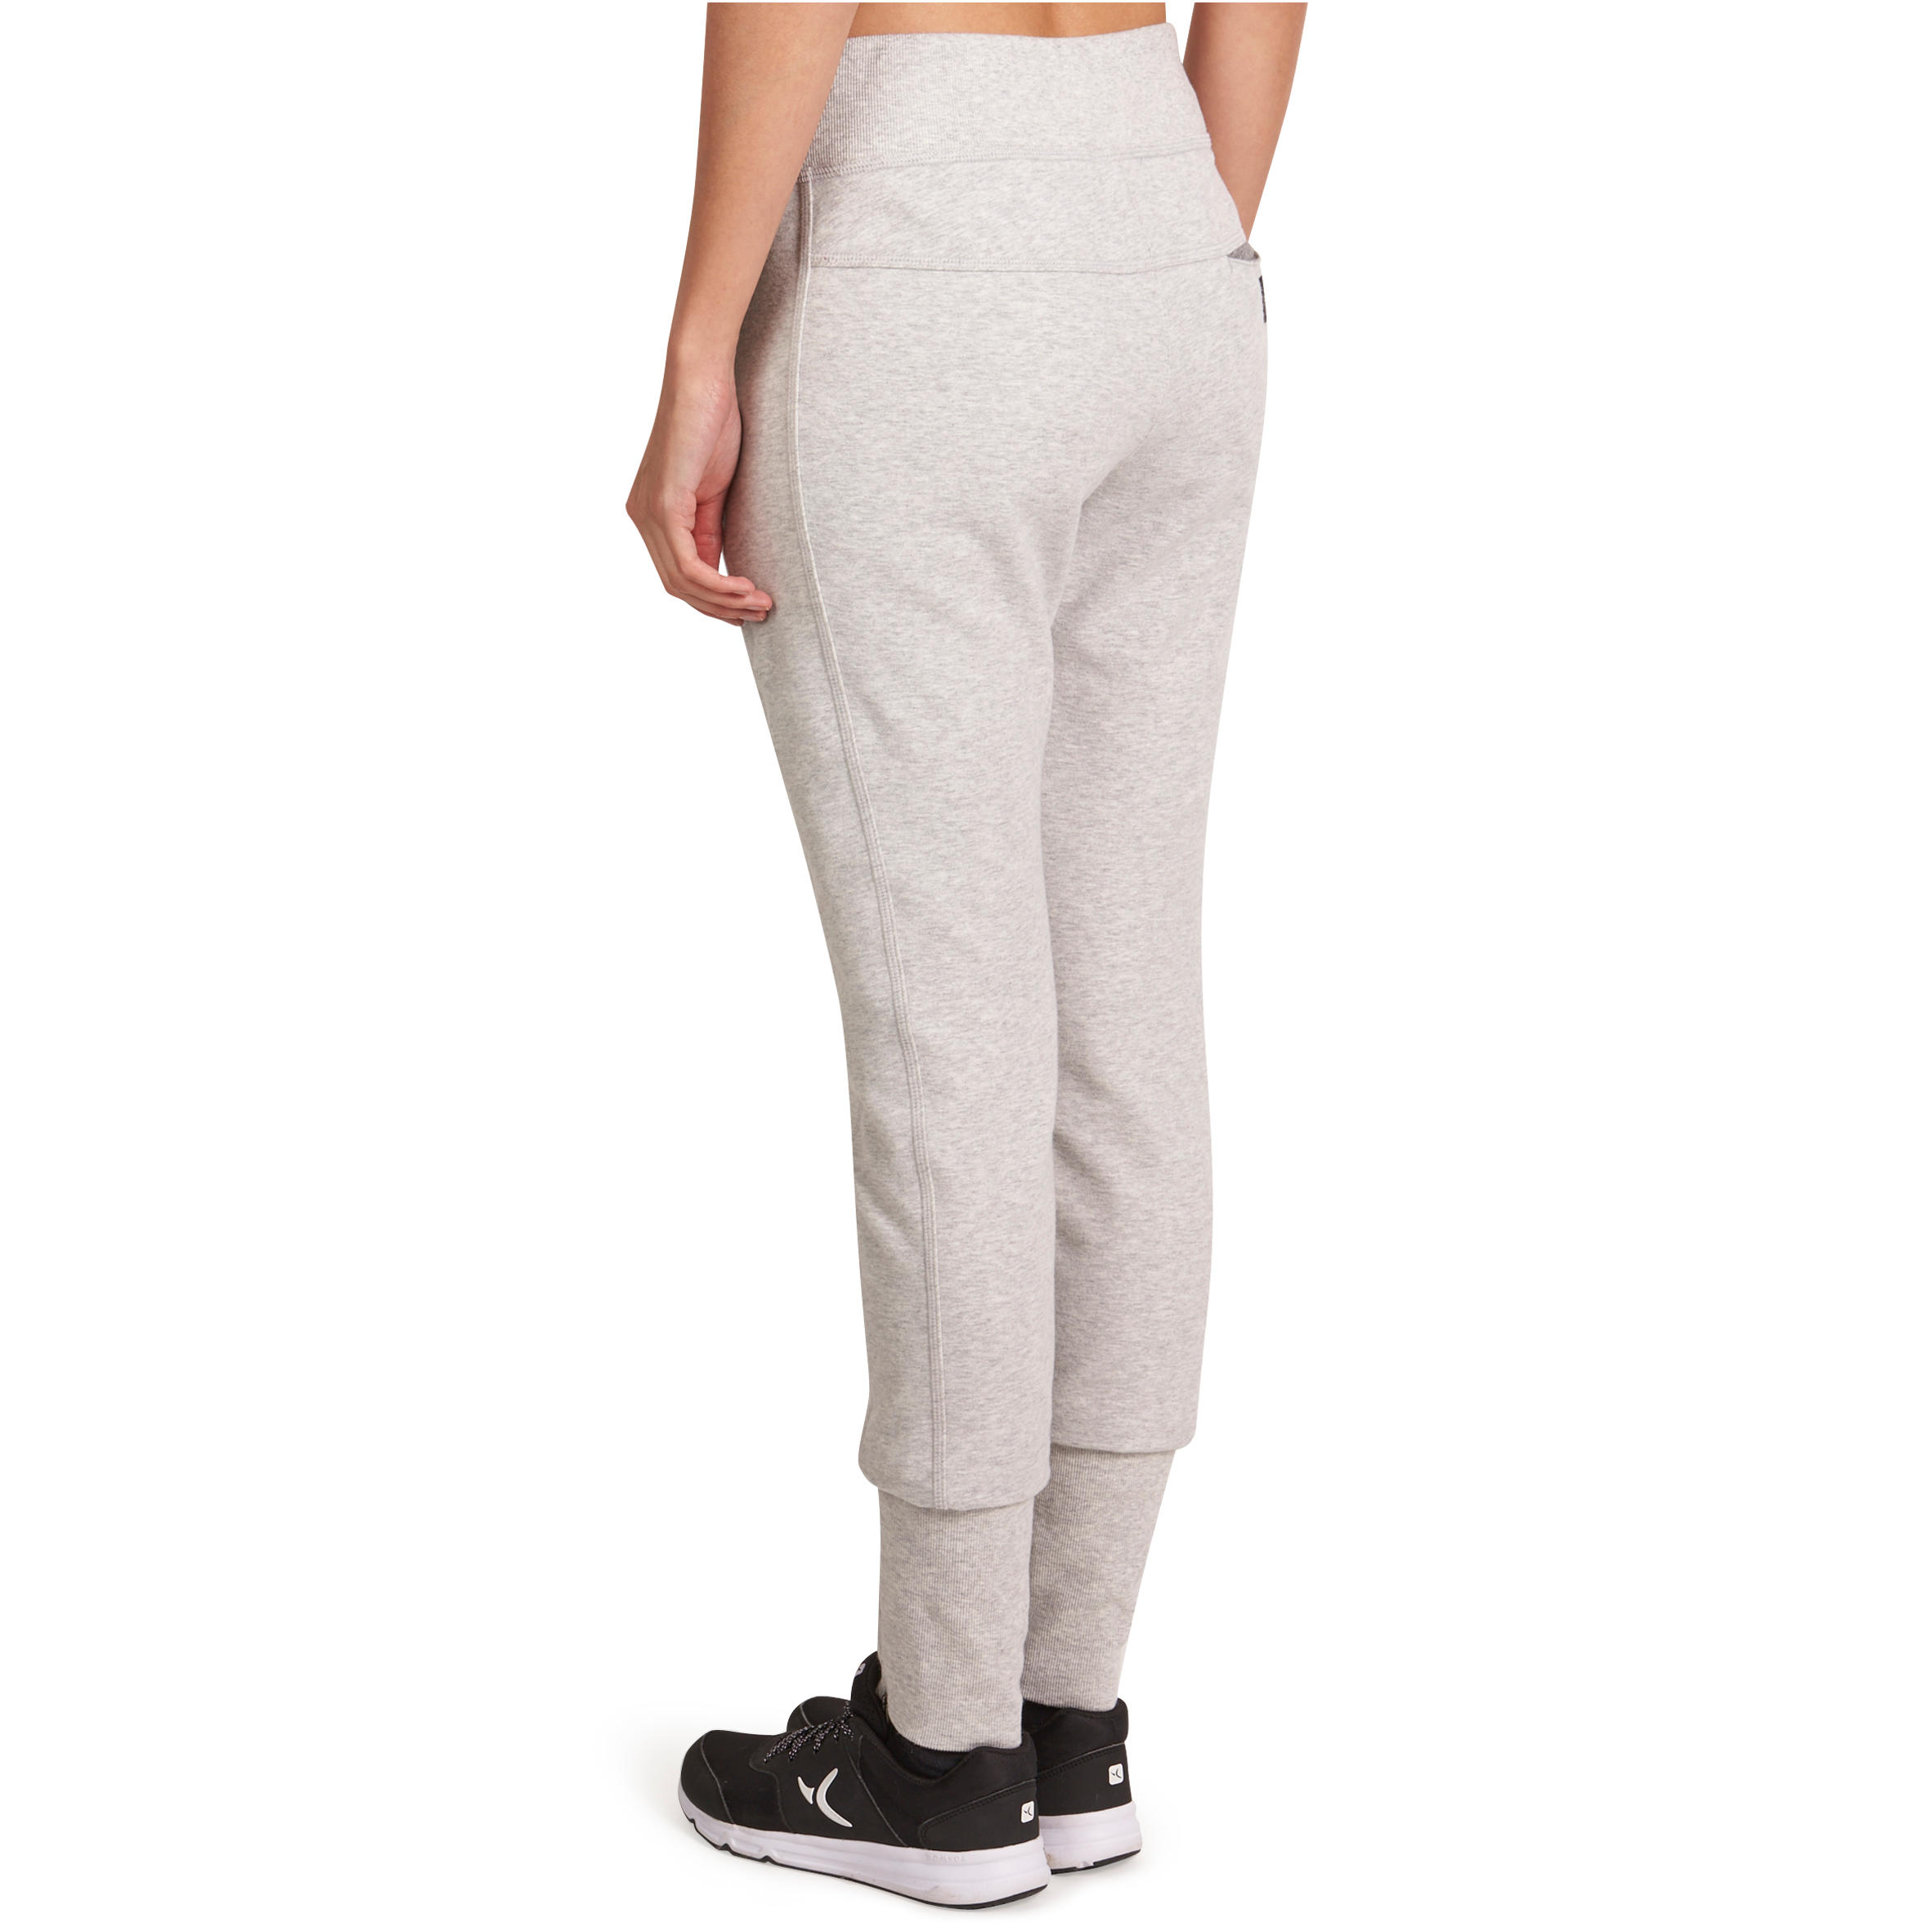 920 Women's Slim-Fit Gym & Pilates Bottoms with Zip Ankles - Light Mottled Grey 4/14